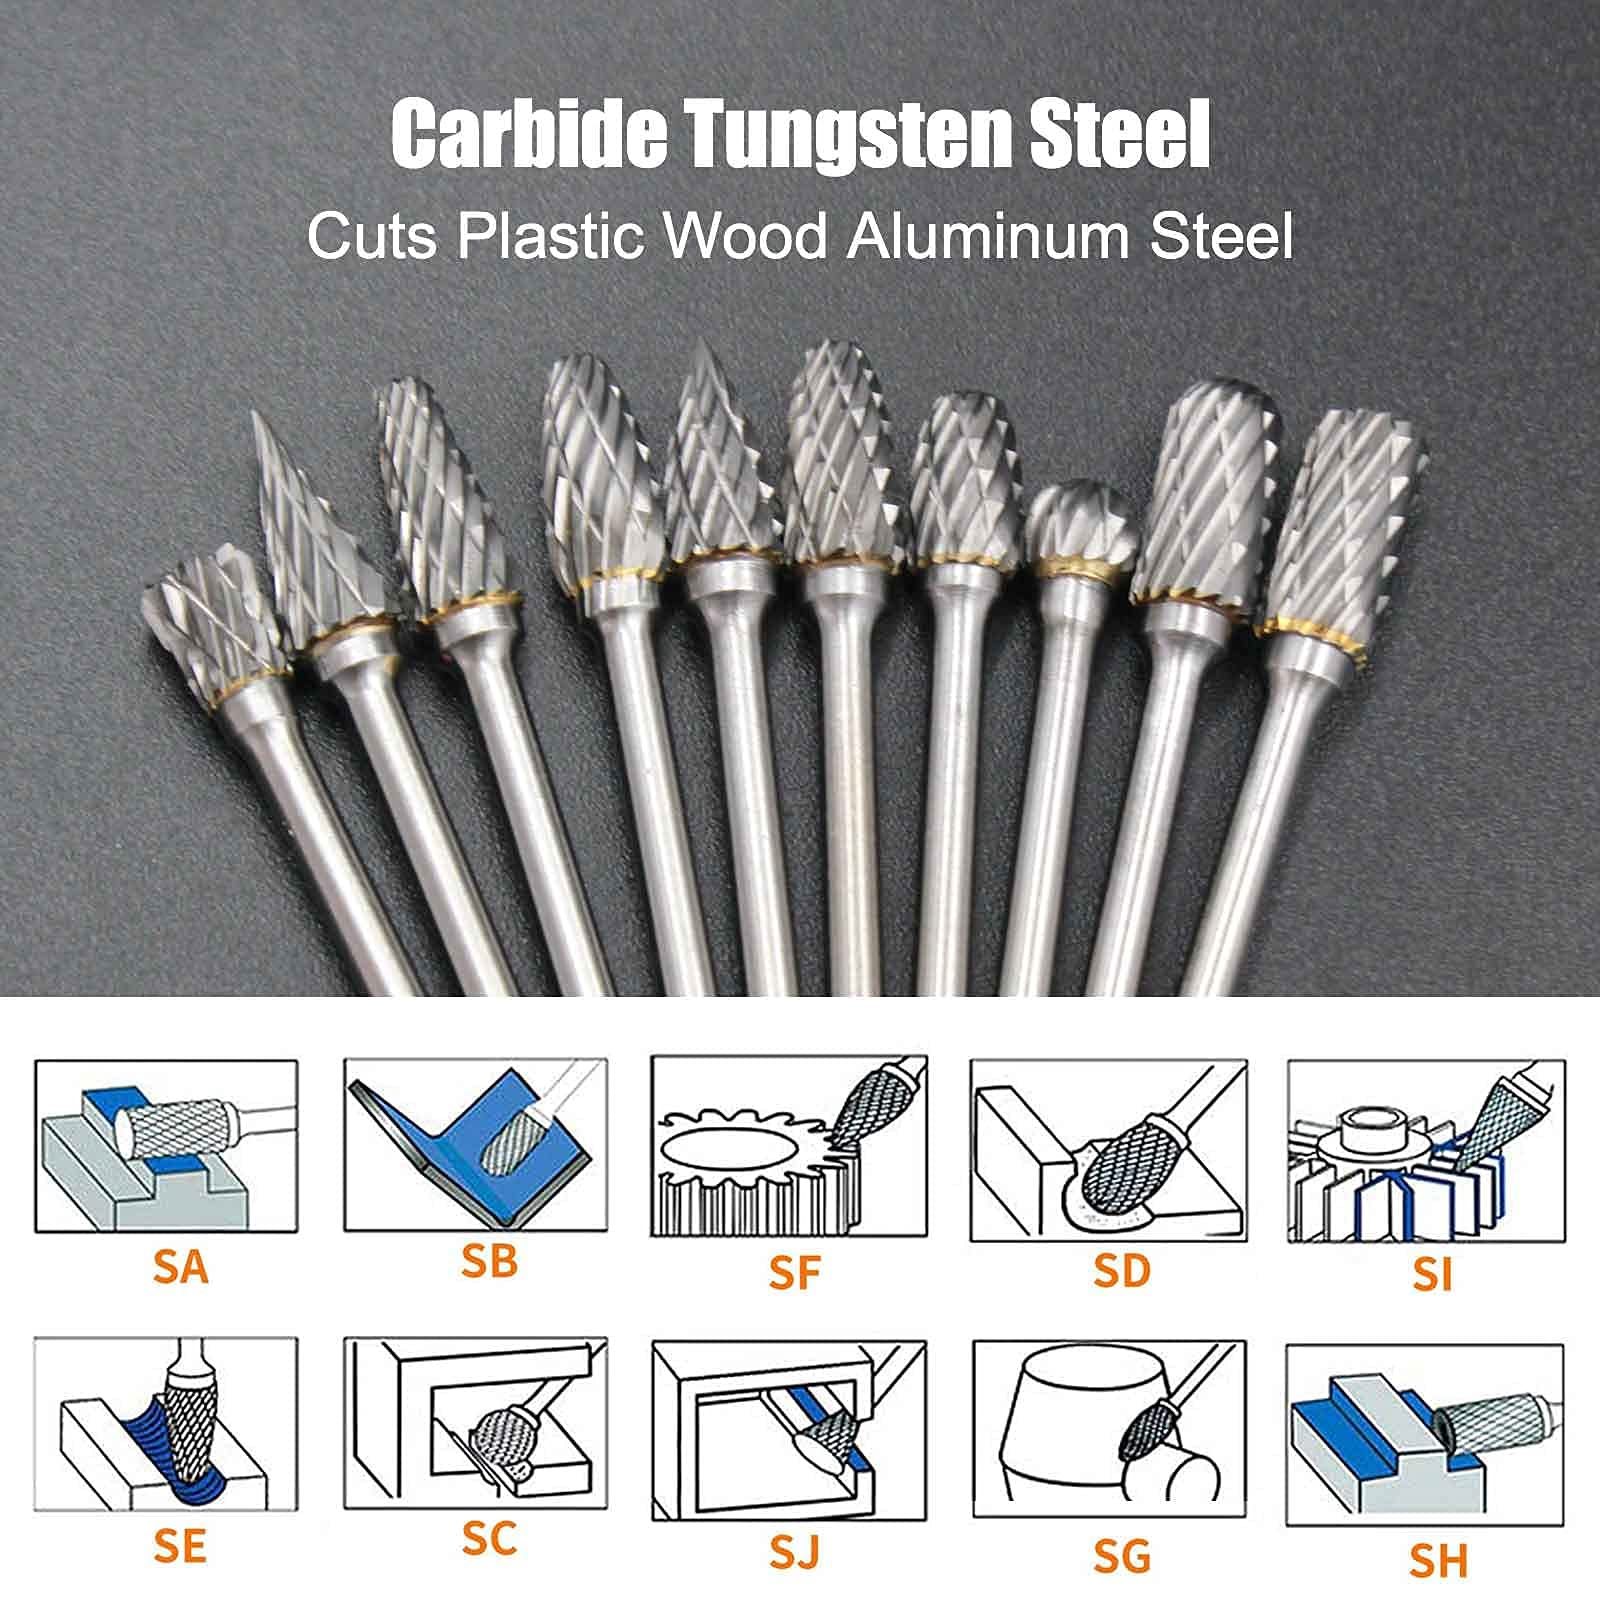 Handook Tungsten Carbide Double Cut Burr Set, with 1/8" Shank 1/4" Grinding Head Length Tungsten Steel for Grinder, DIY Wood-Working Carving, Soft Metal Polishing, Engraving, Drilling(10pcs)